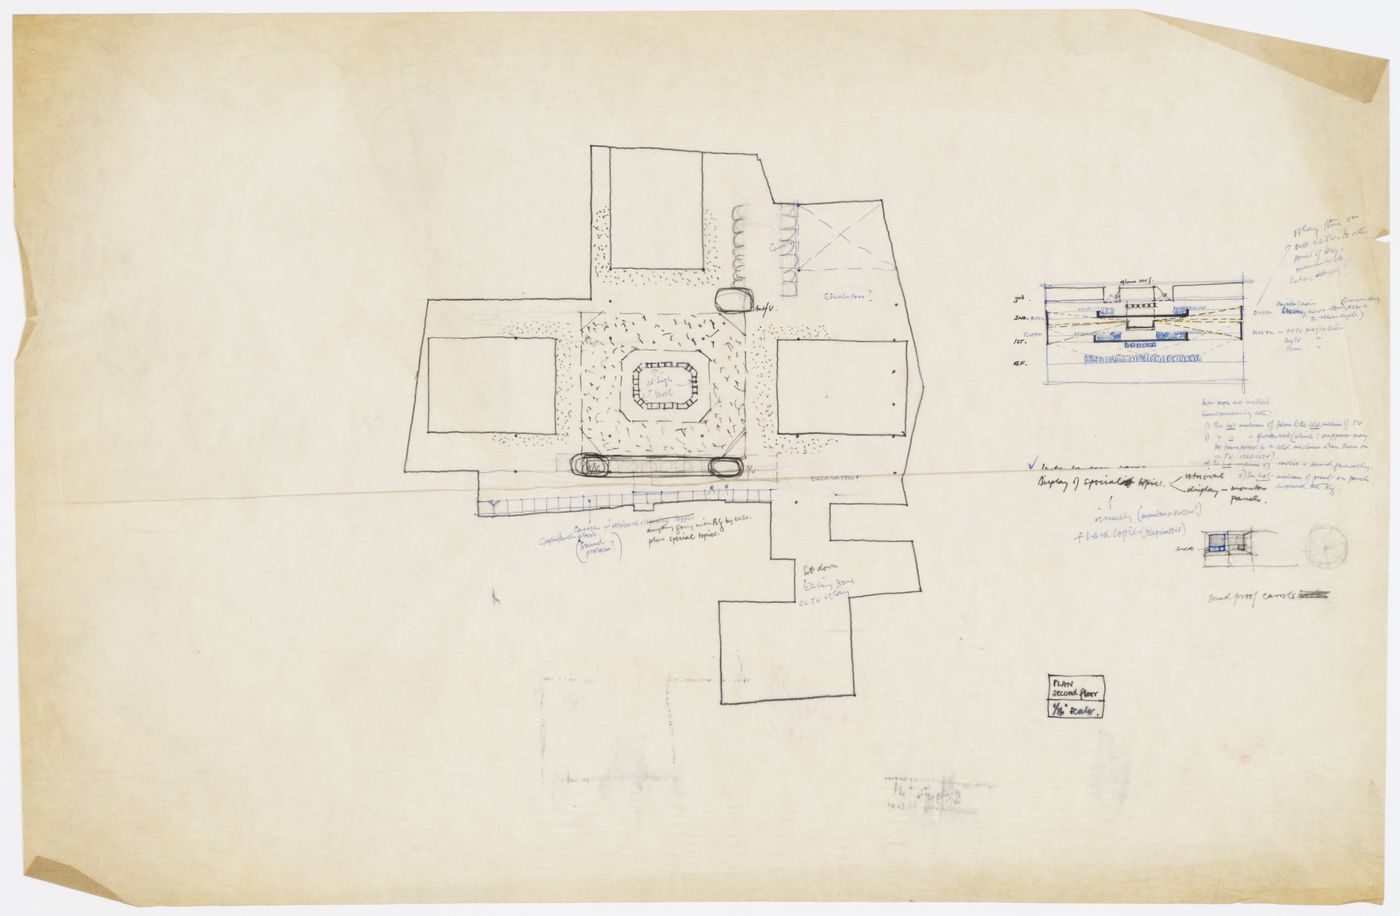 Sketch plan and section for second floor, Oxford Corner House, London